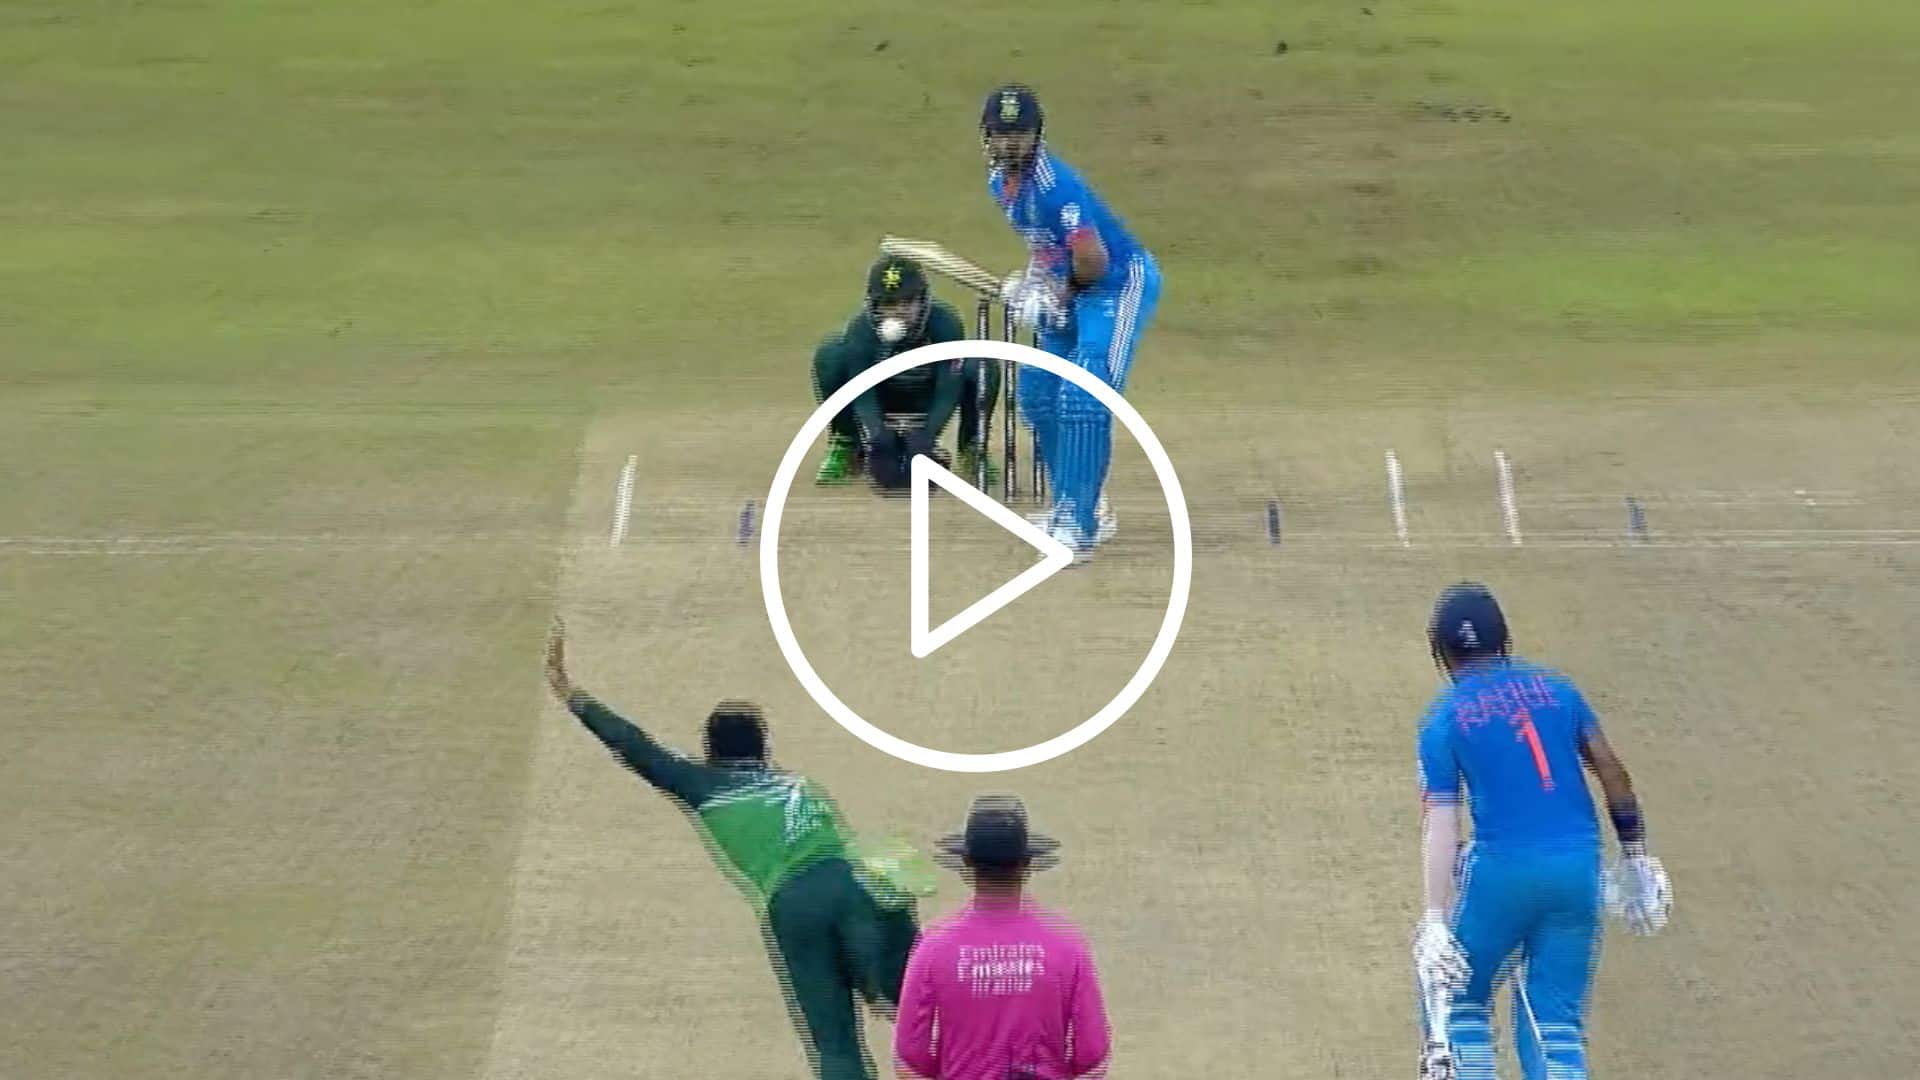 [Watch] Virat Kohli Completes Flamboyant Fifty vs Pakistan in Asia Cup